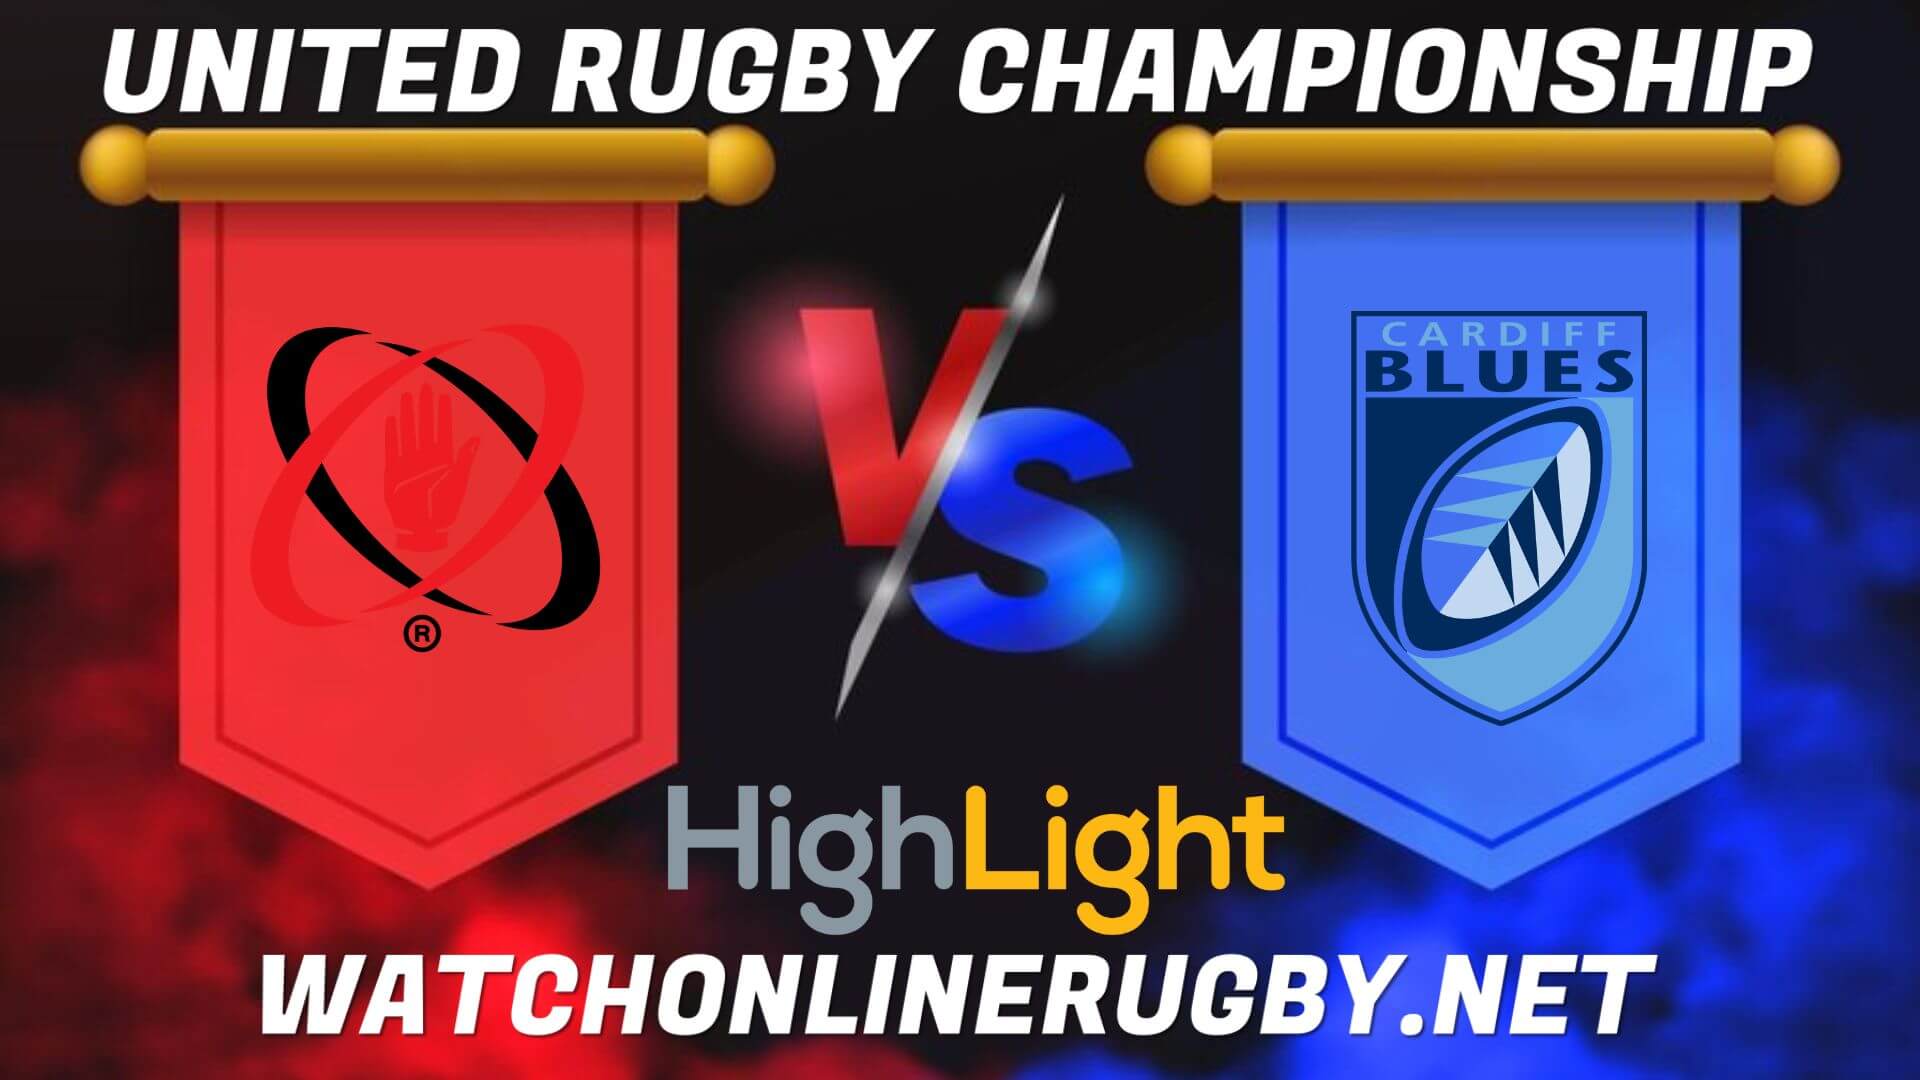 Ulster Vs Cardiff Blues United Rugby Championship 2022 RD 13